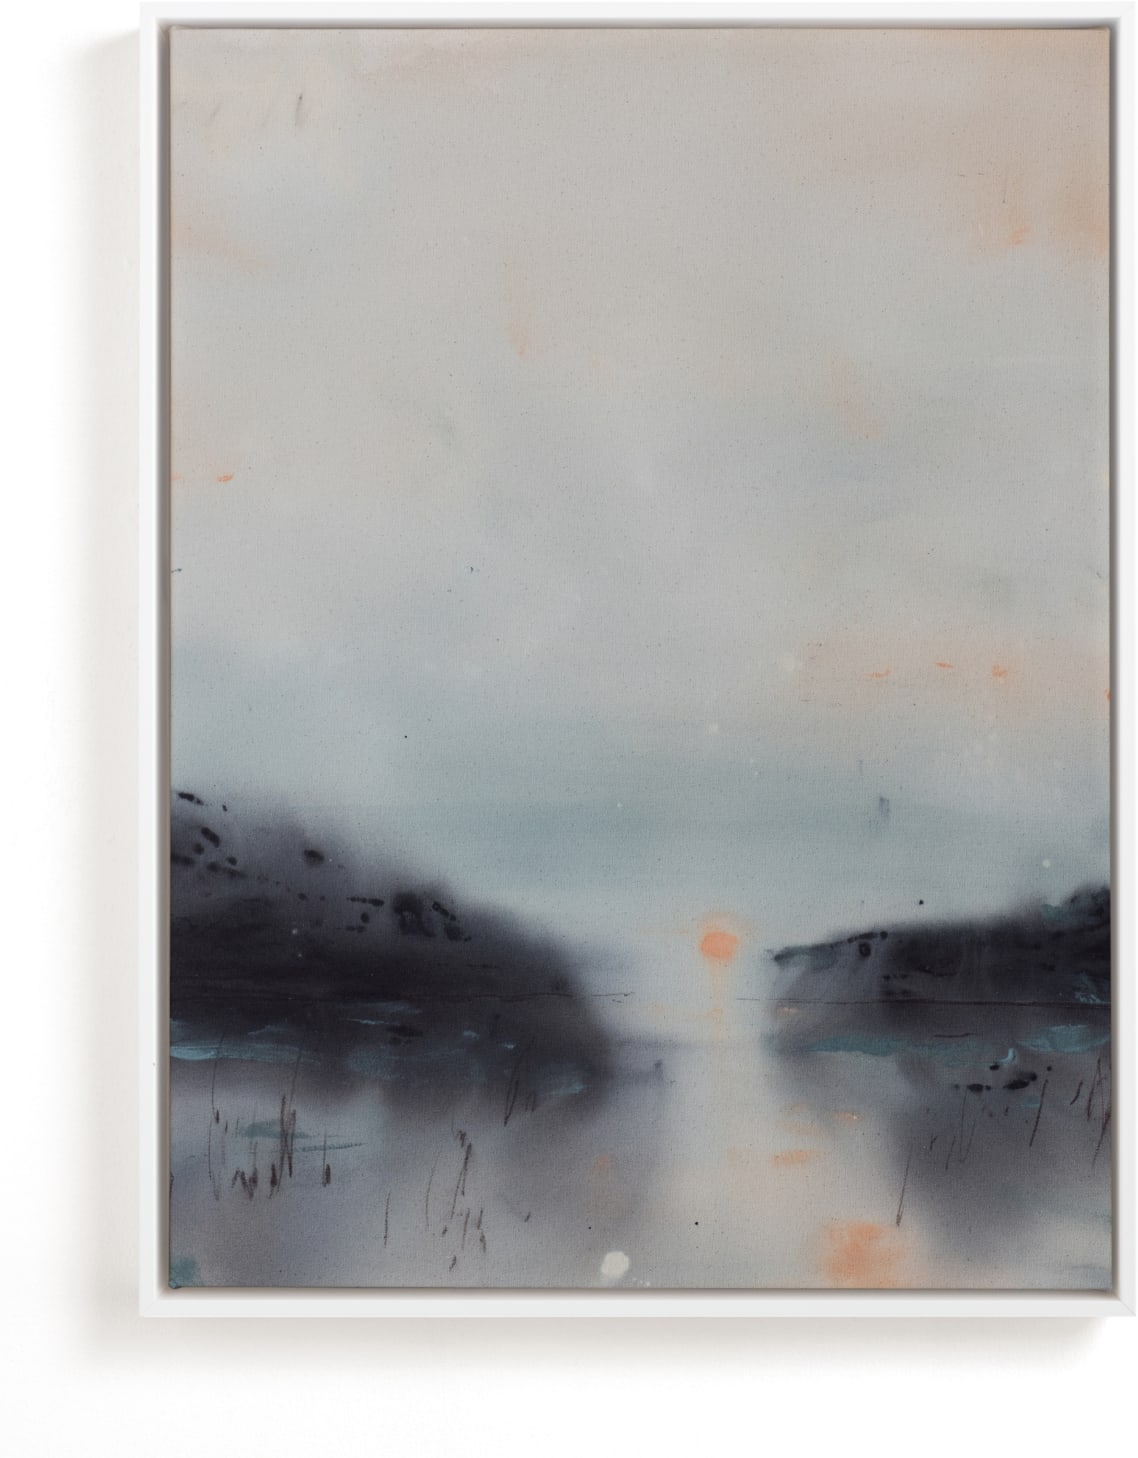 This is a grey art by Christa Kimble called Canal at Sunrise.